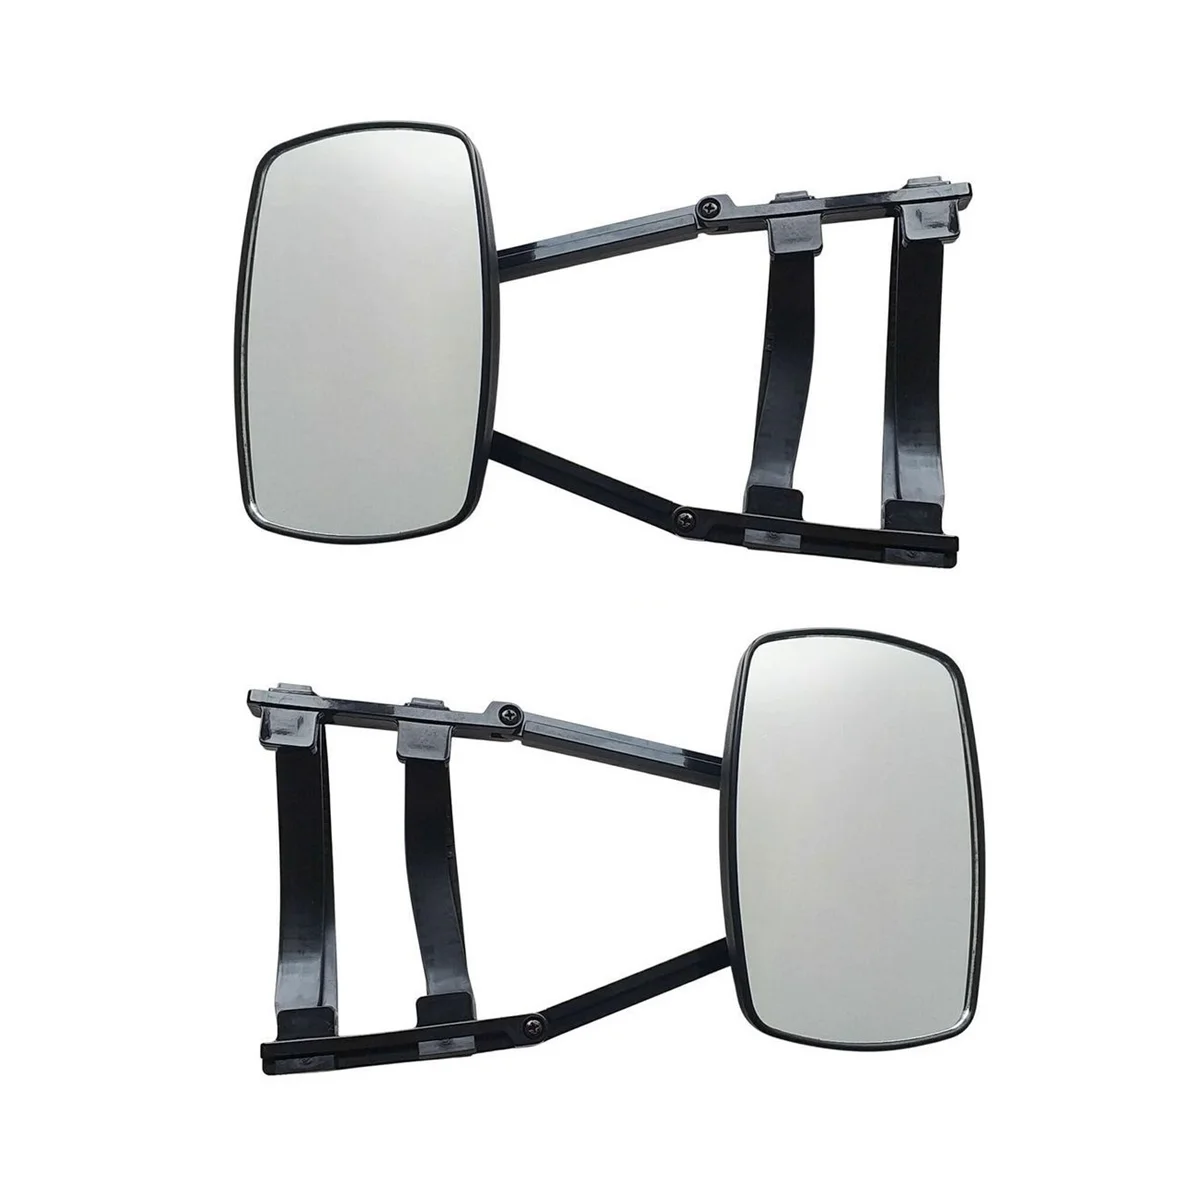 

Universal Clip-on Towing Mirrors Extended Mirrors for Towing 360° Rotation Adjustable Towing Mirror, Black 2PCS